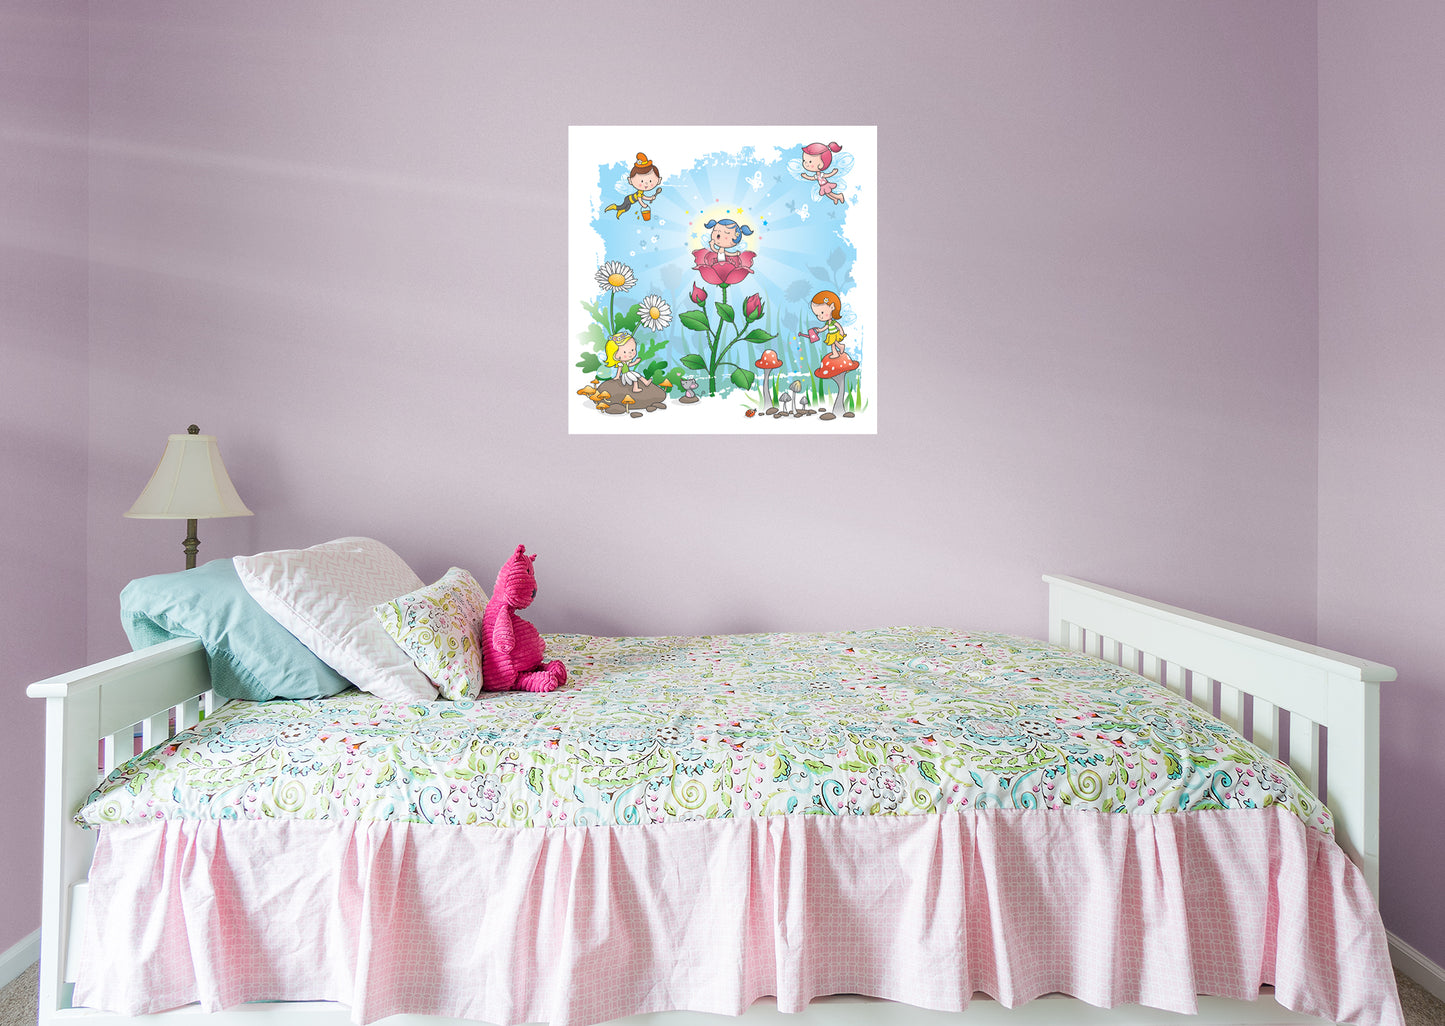 Nursery:  Morning Mural        -   Removable Wall   Adhesive Decal